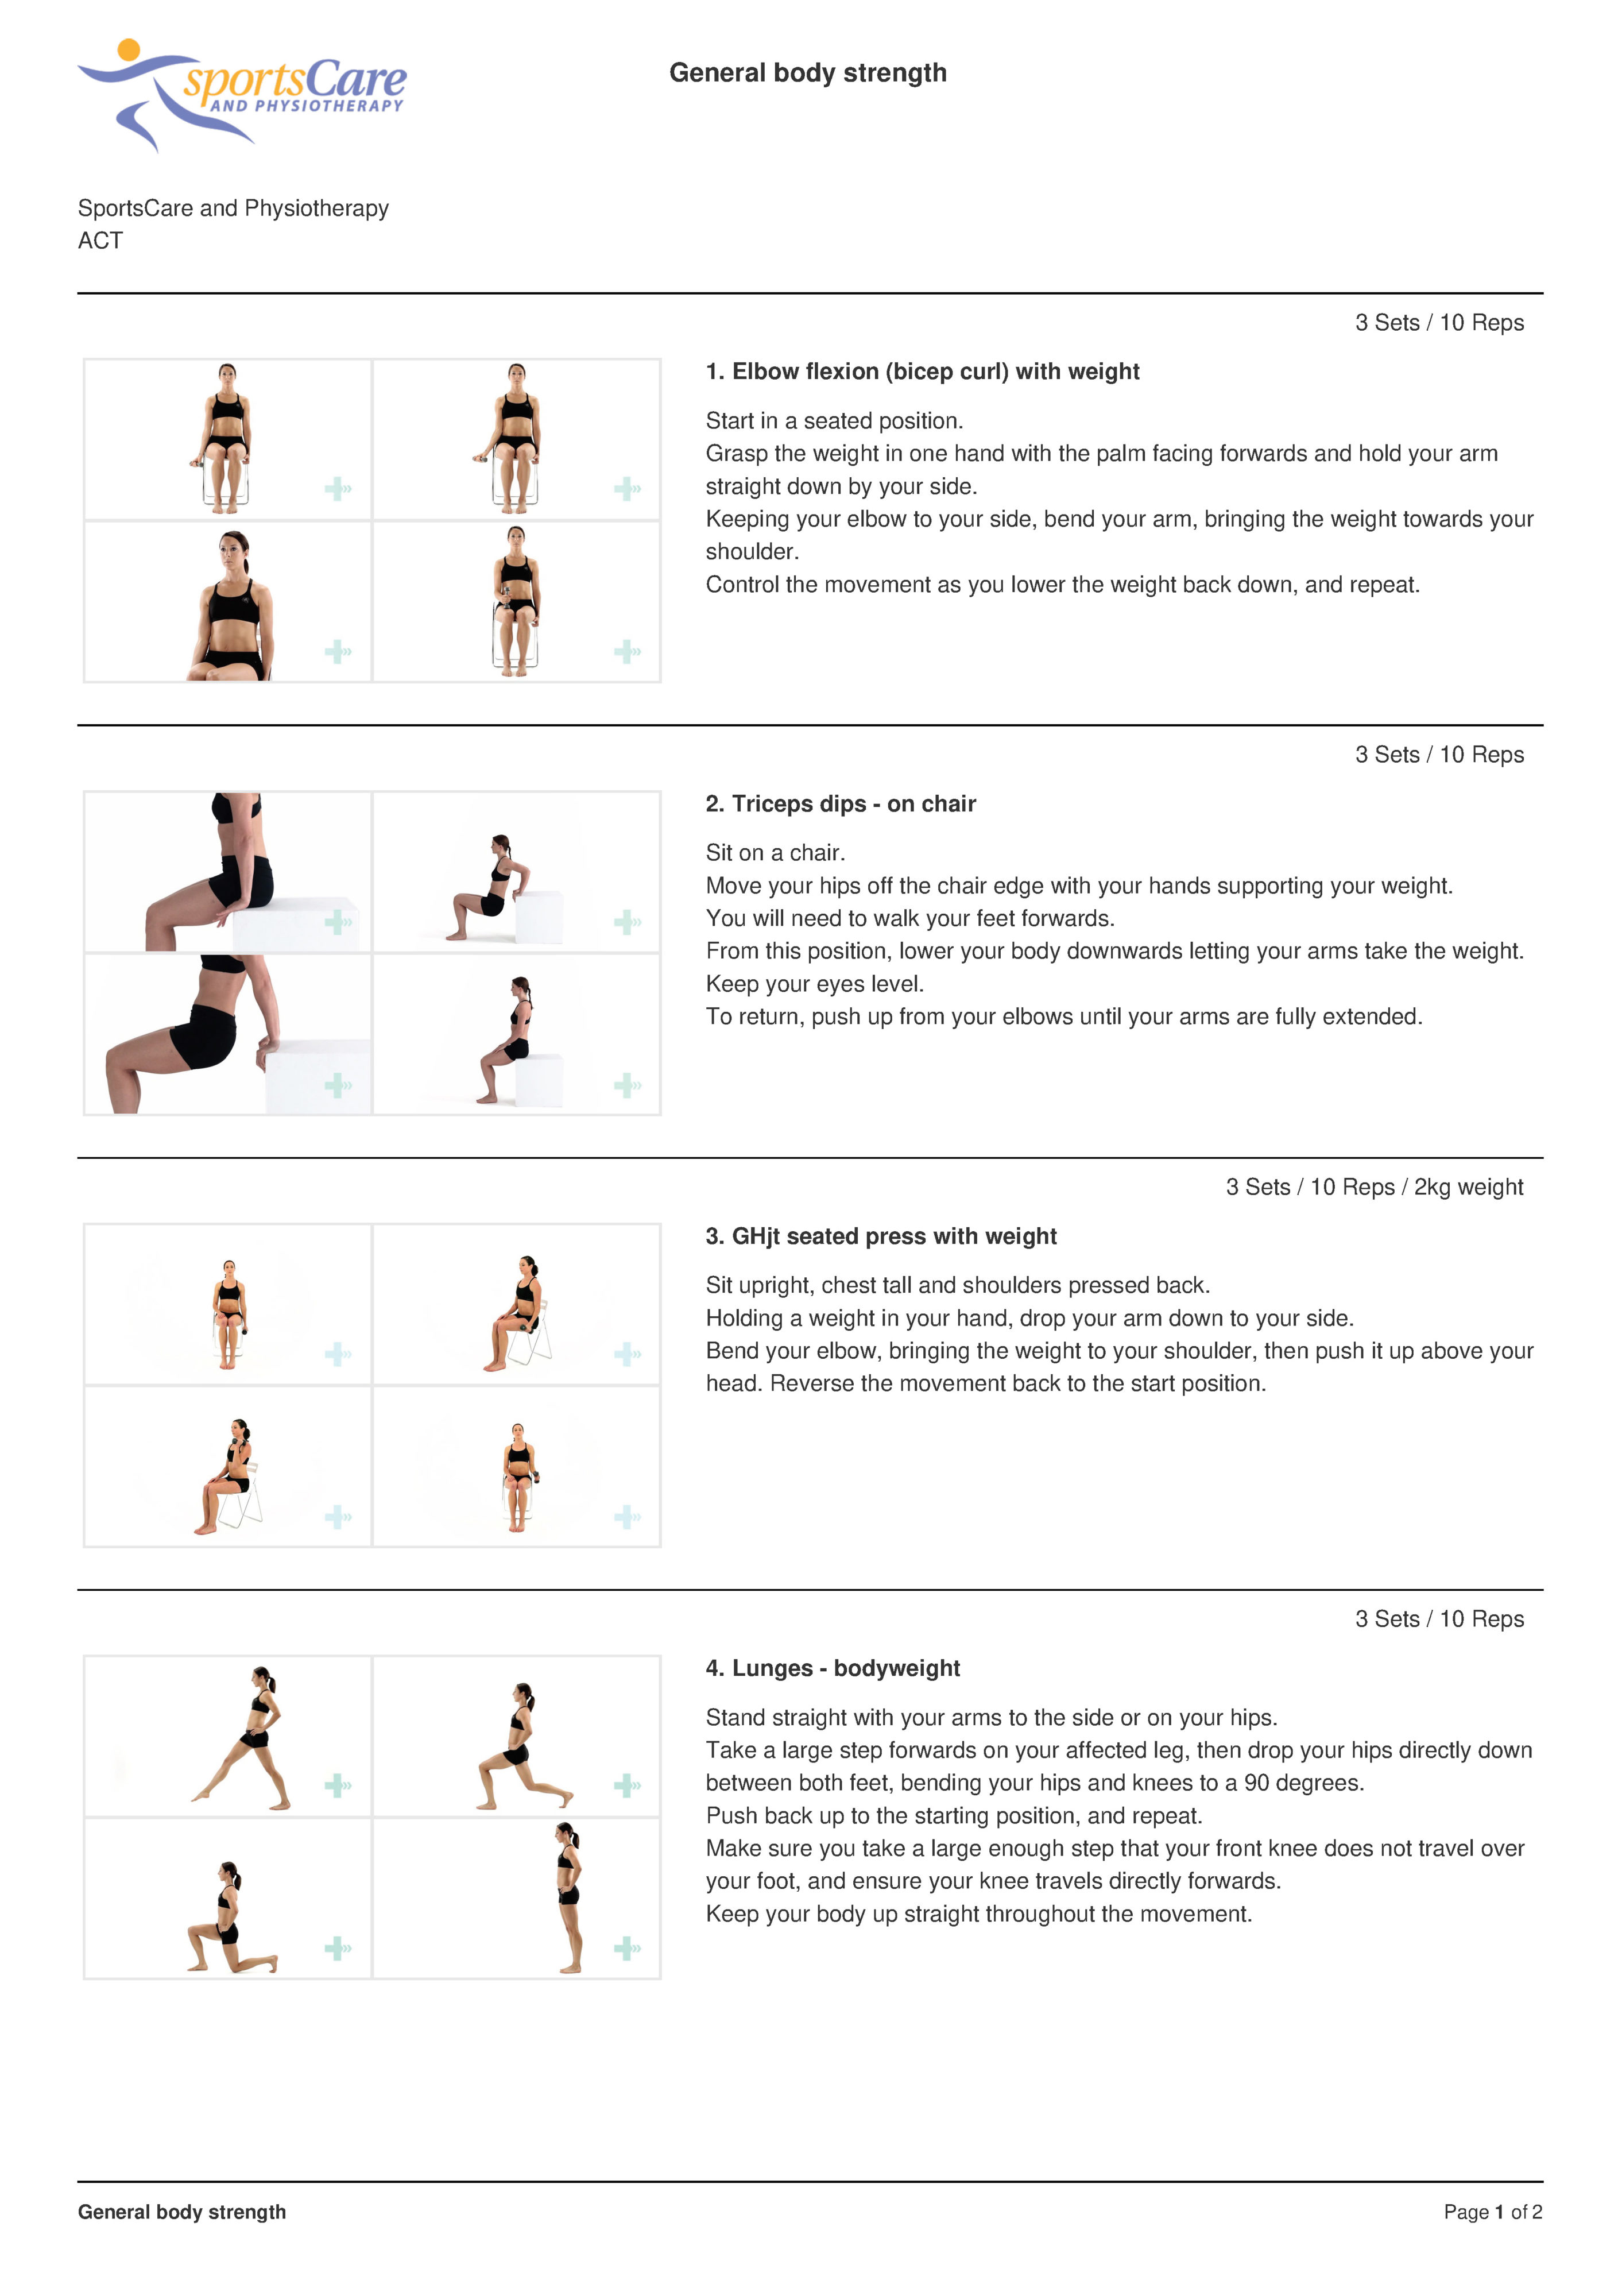 Check out this general body strength workout plan for some lockdown fitness ideas.